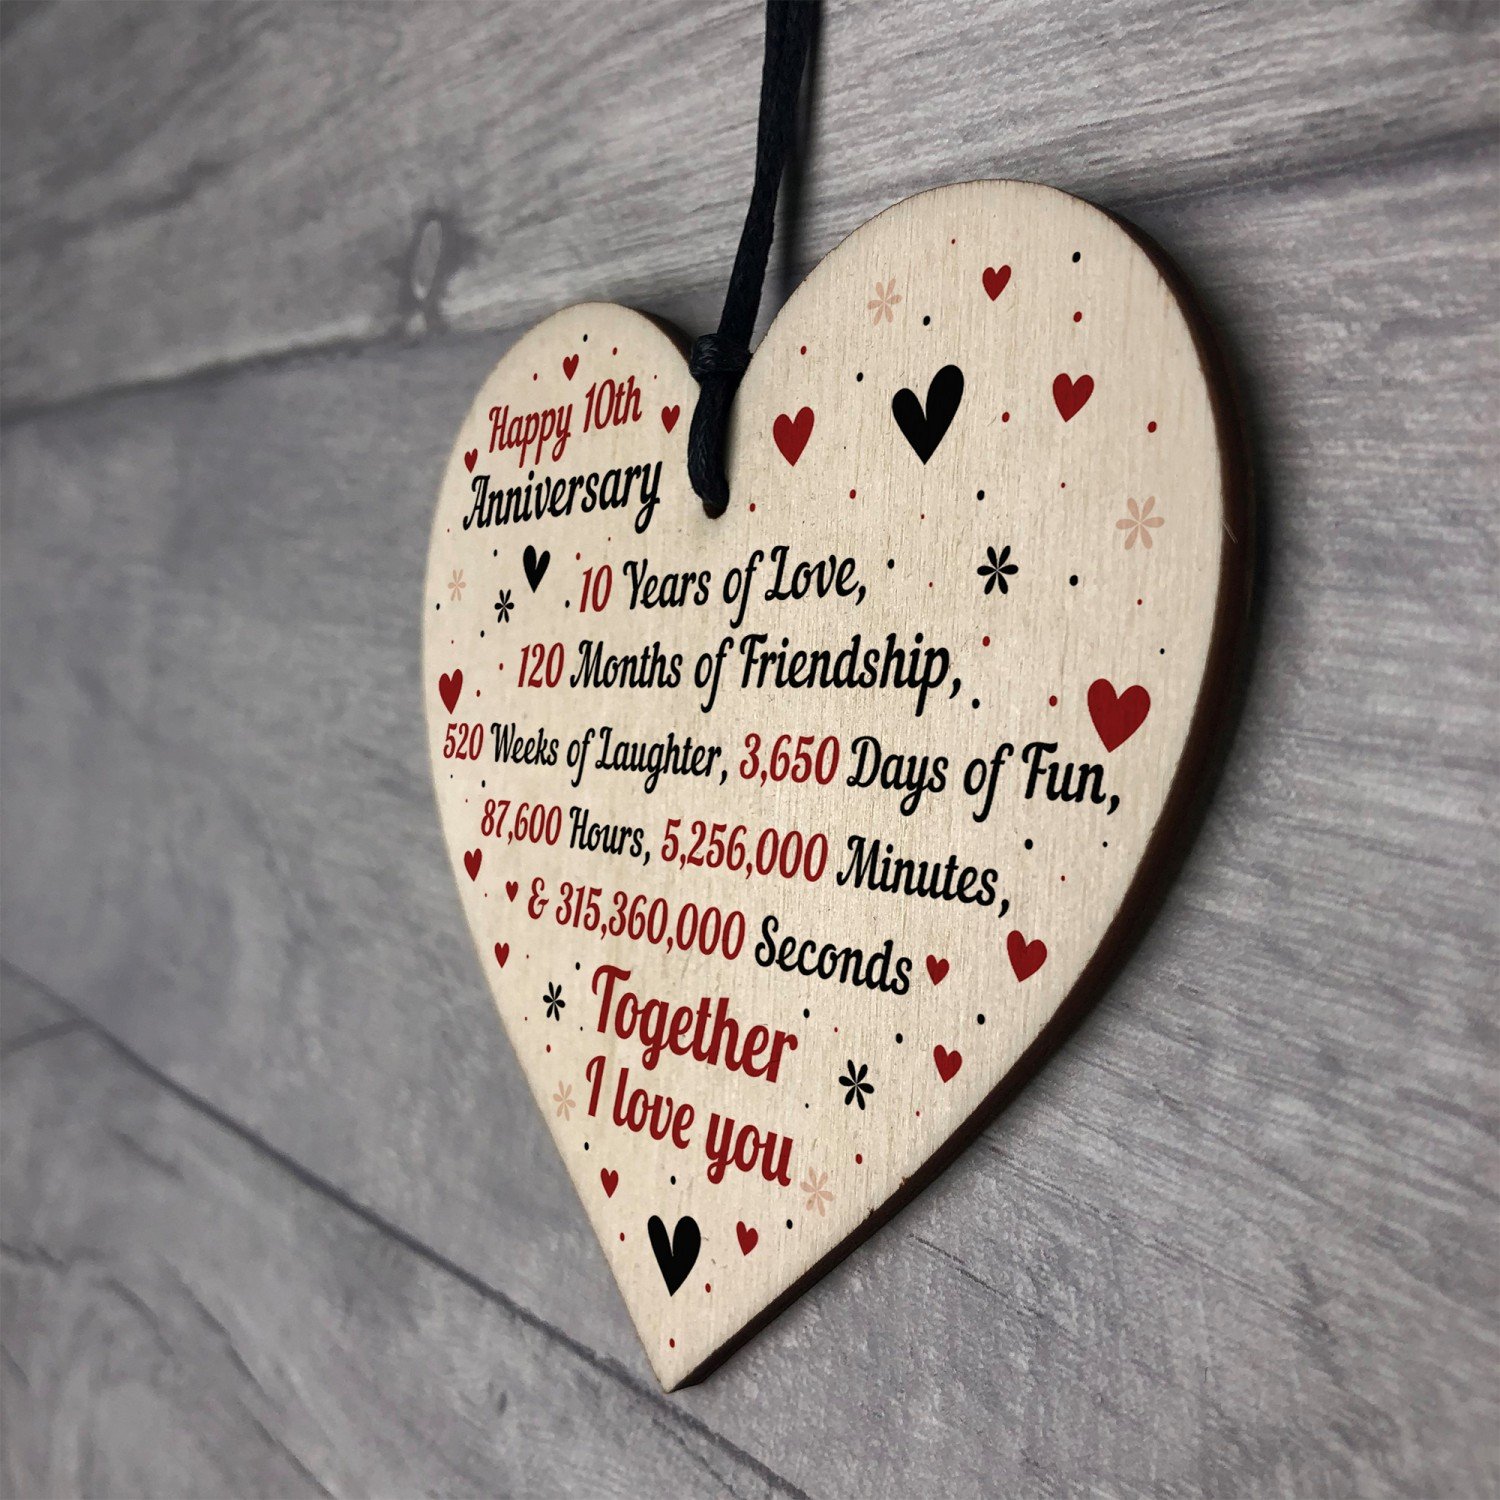 10Th Wedding Anniversary Gifts For Him : Wedding Anniversary Gifts by ...